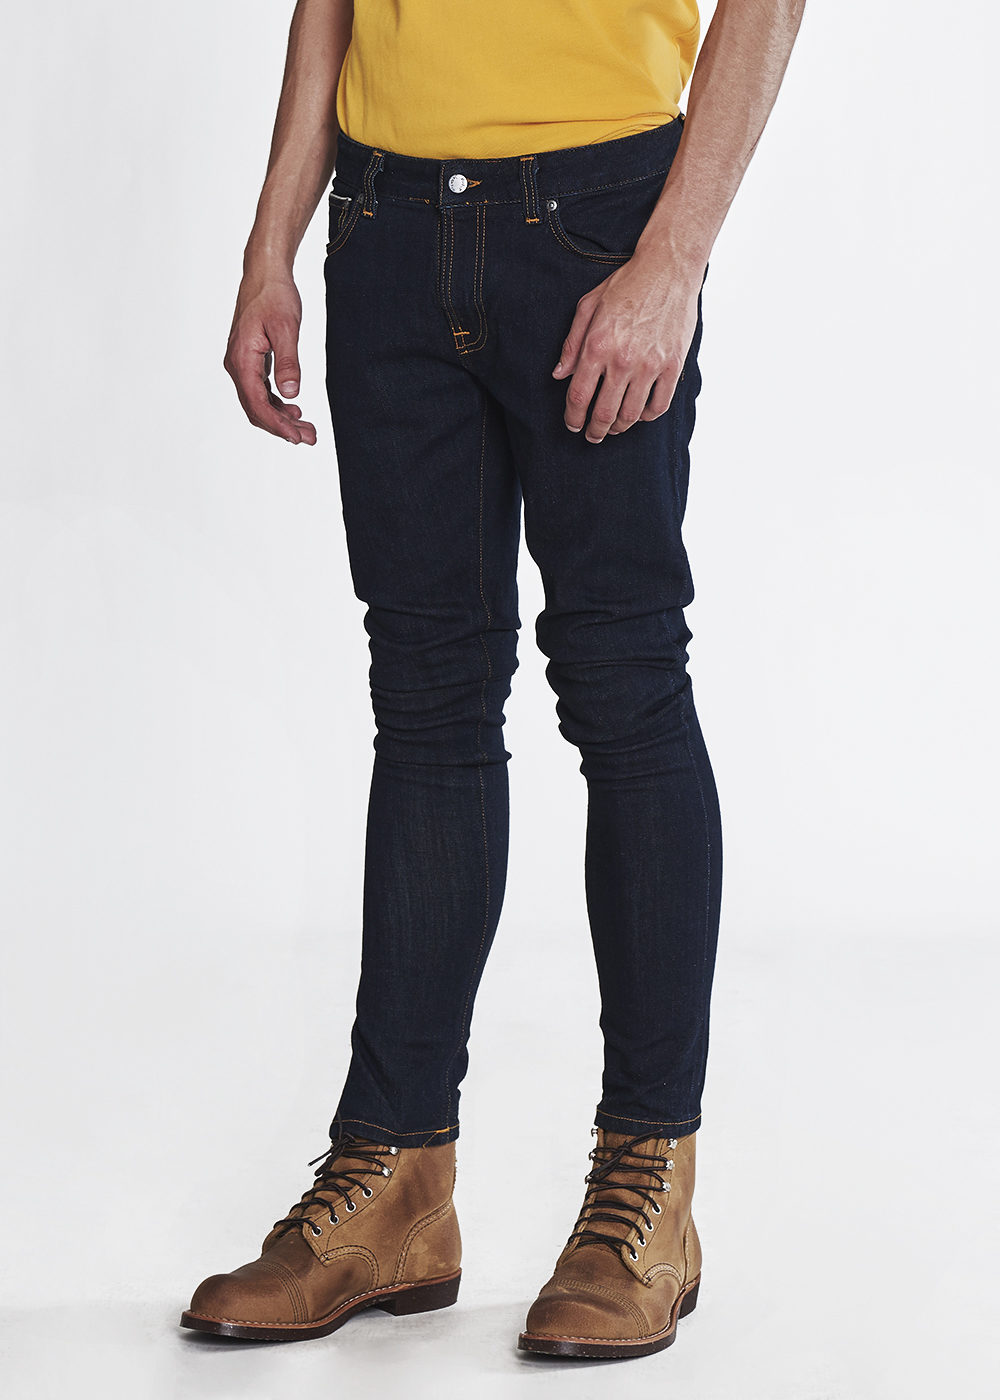 NUDIE JEANS SKINNY LIN - RINSE SELVAGE STRETCH | Pronto